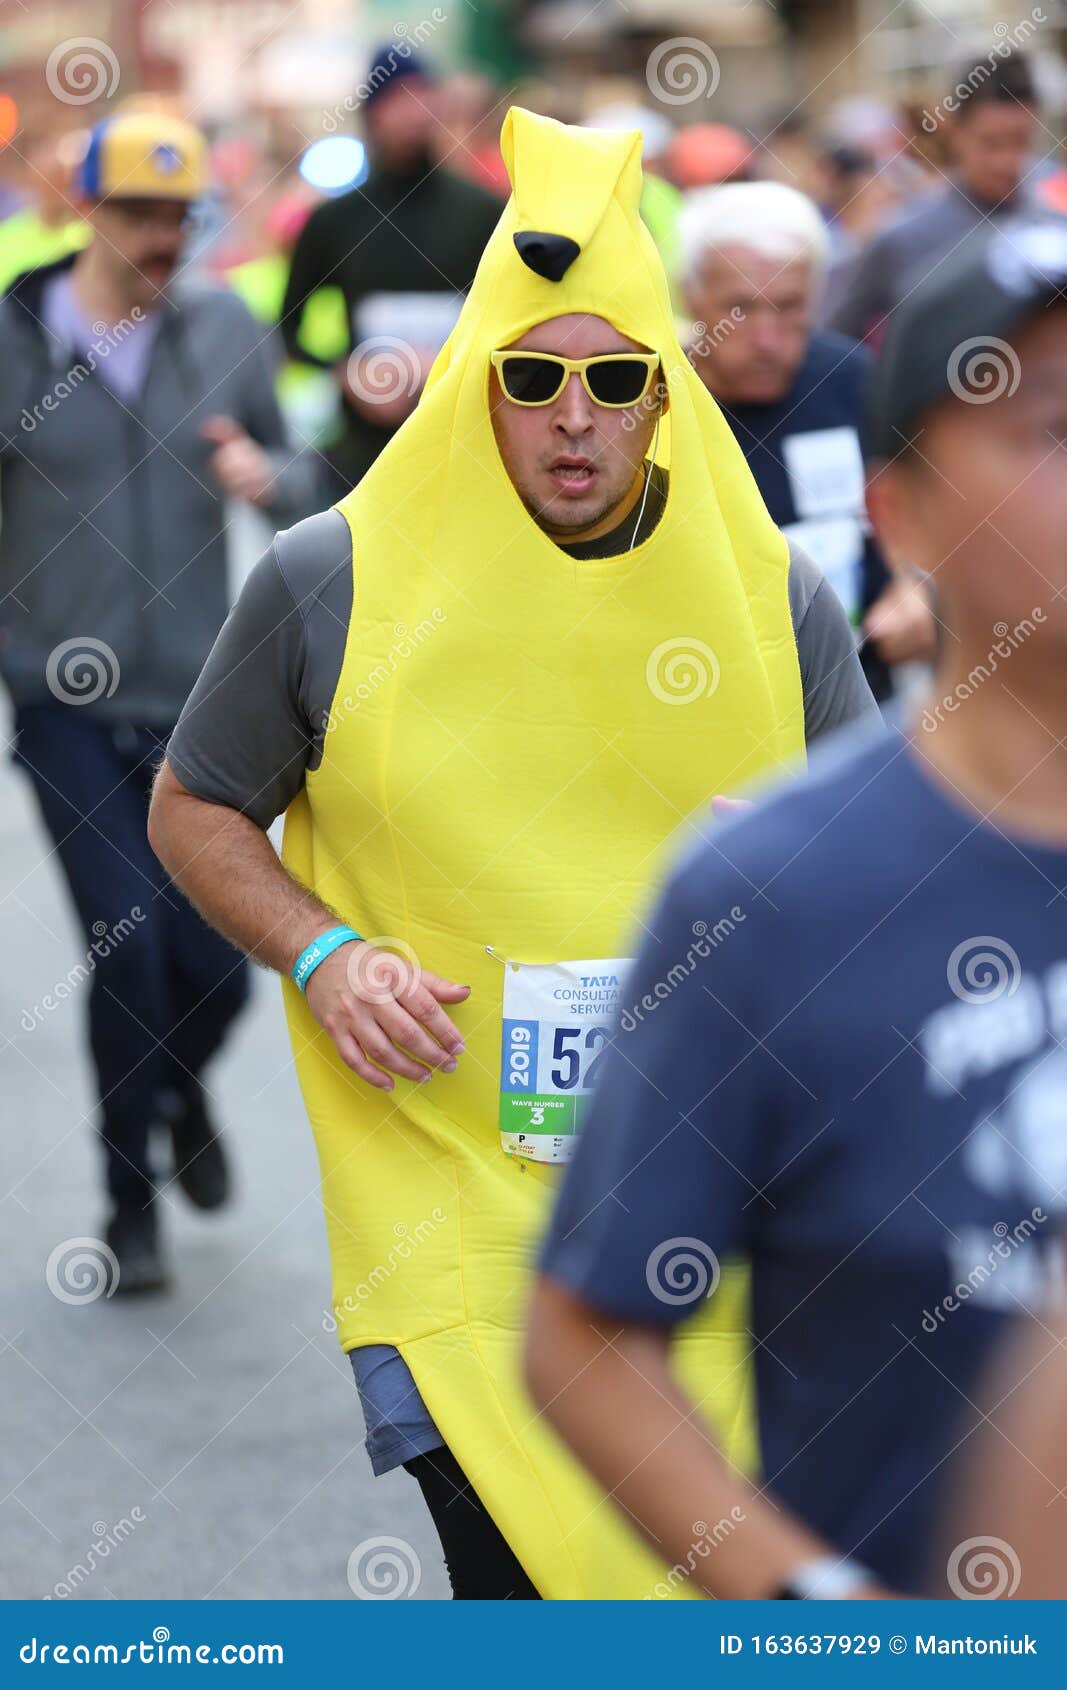 Marathon NYC 2019 Sport Event in Central Park Editorial Stock Image